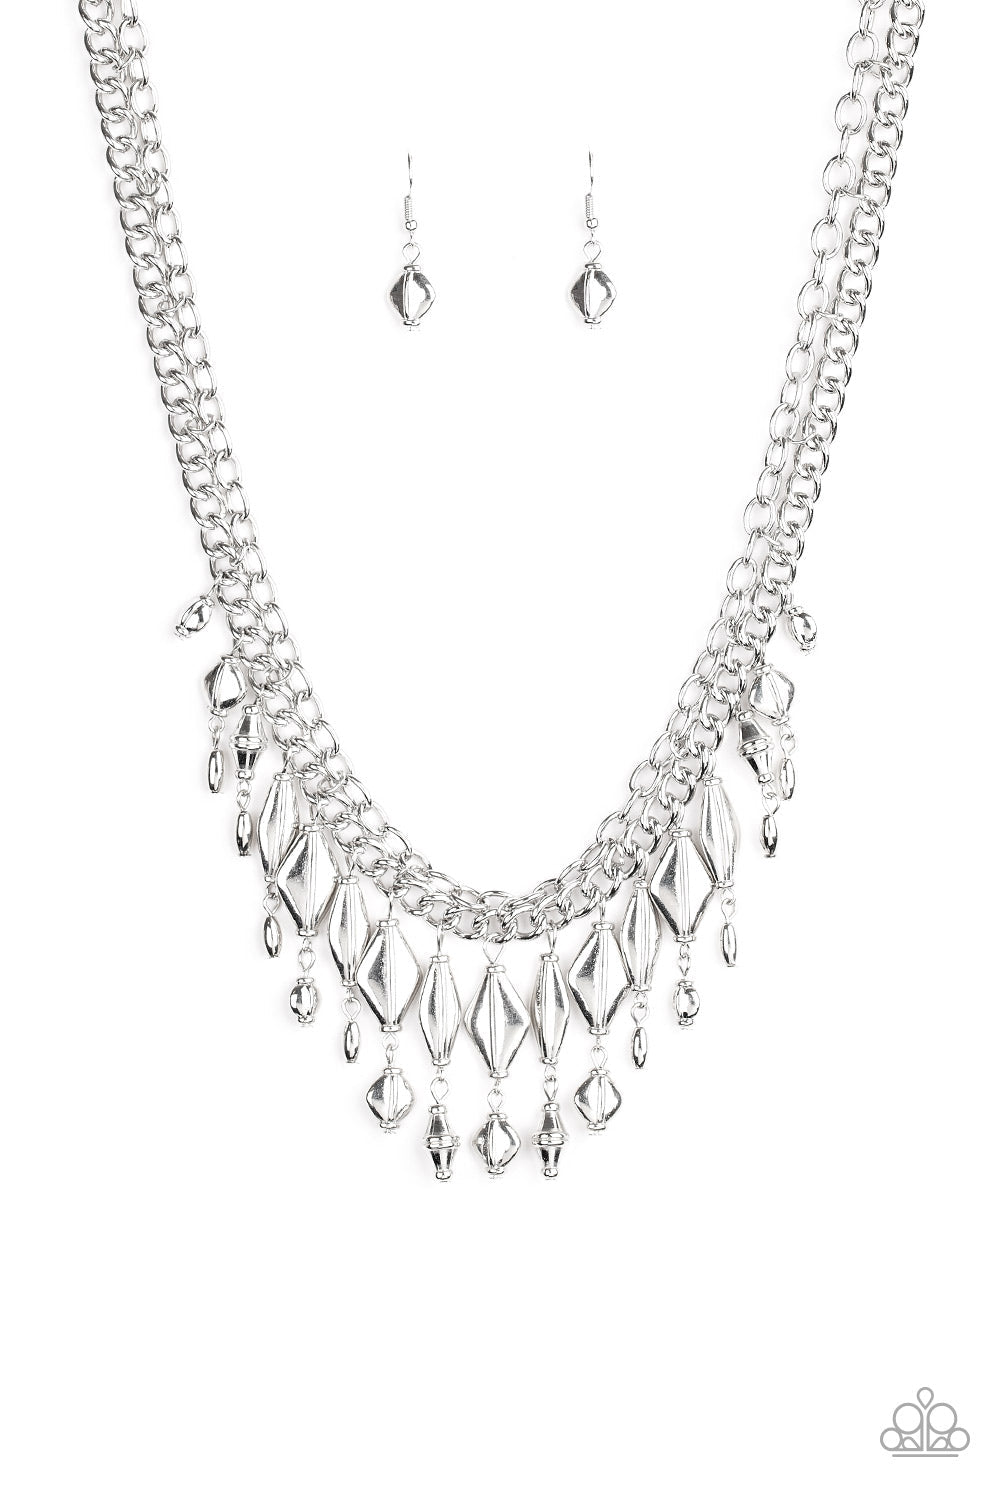 Trinket Trade - Silver Necklace - Paparazzi Accessories - Mismatched collection of silver beaded tassels dangle from the bottom of two interconnecting silver chains, creating a noisy fringe below the collar. Features an adjustable clasp closure.